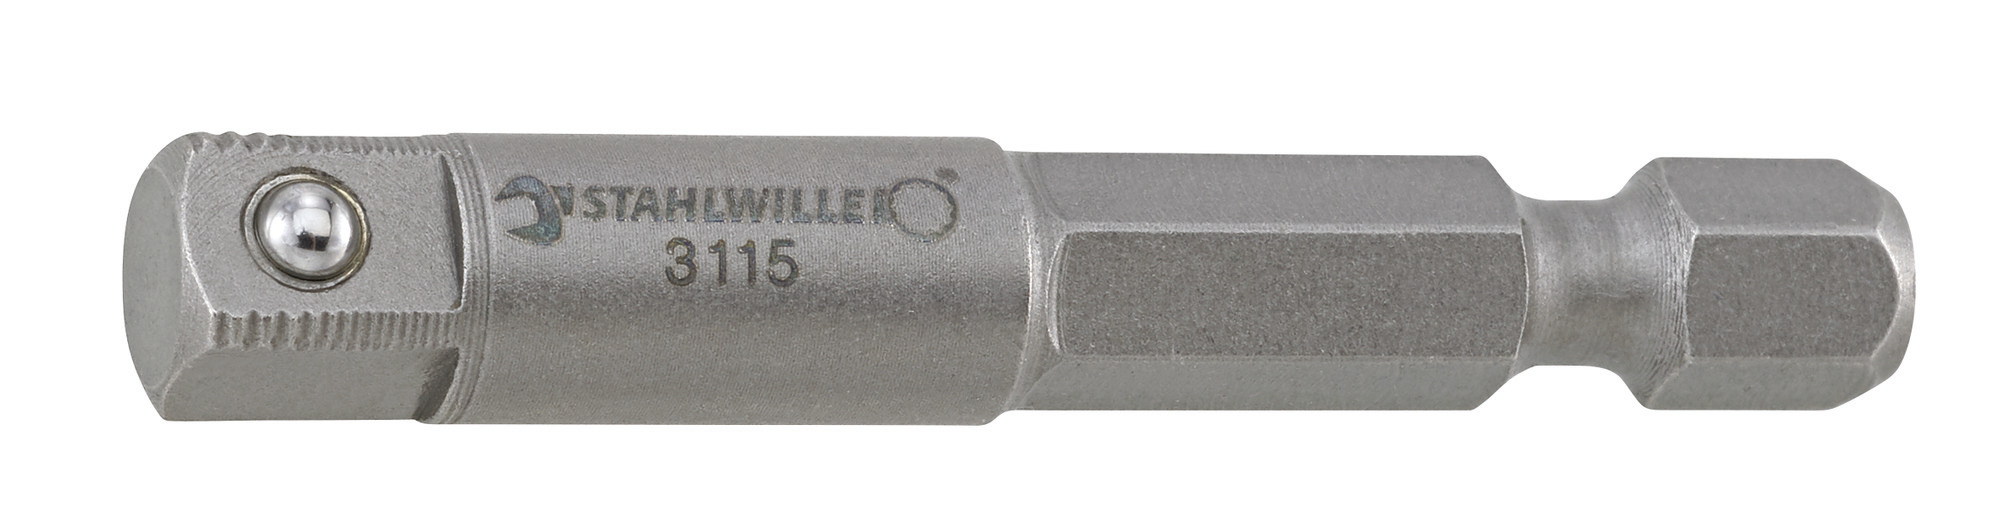 Bit Connector, Manually Operated 3115